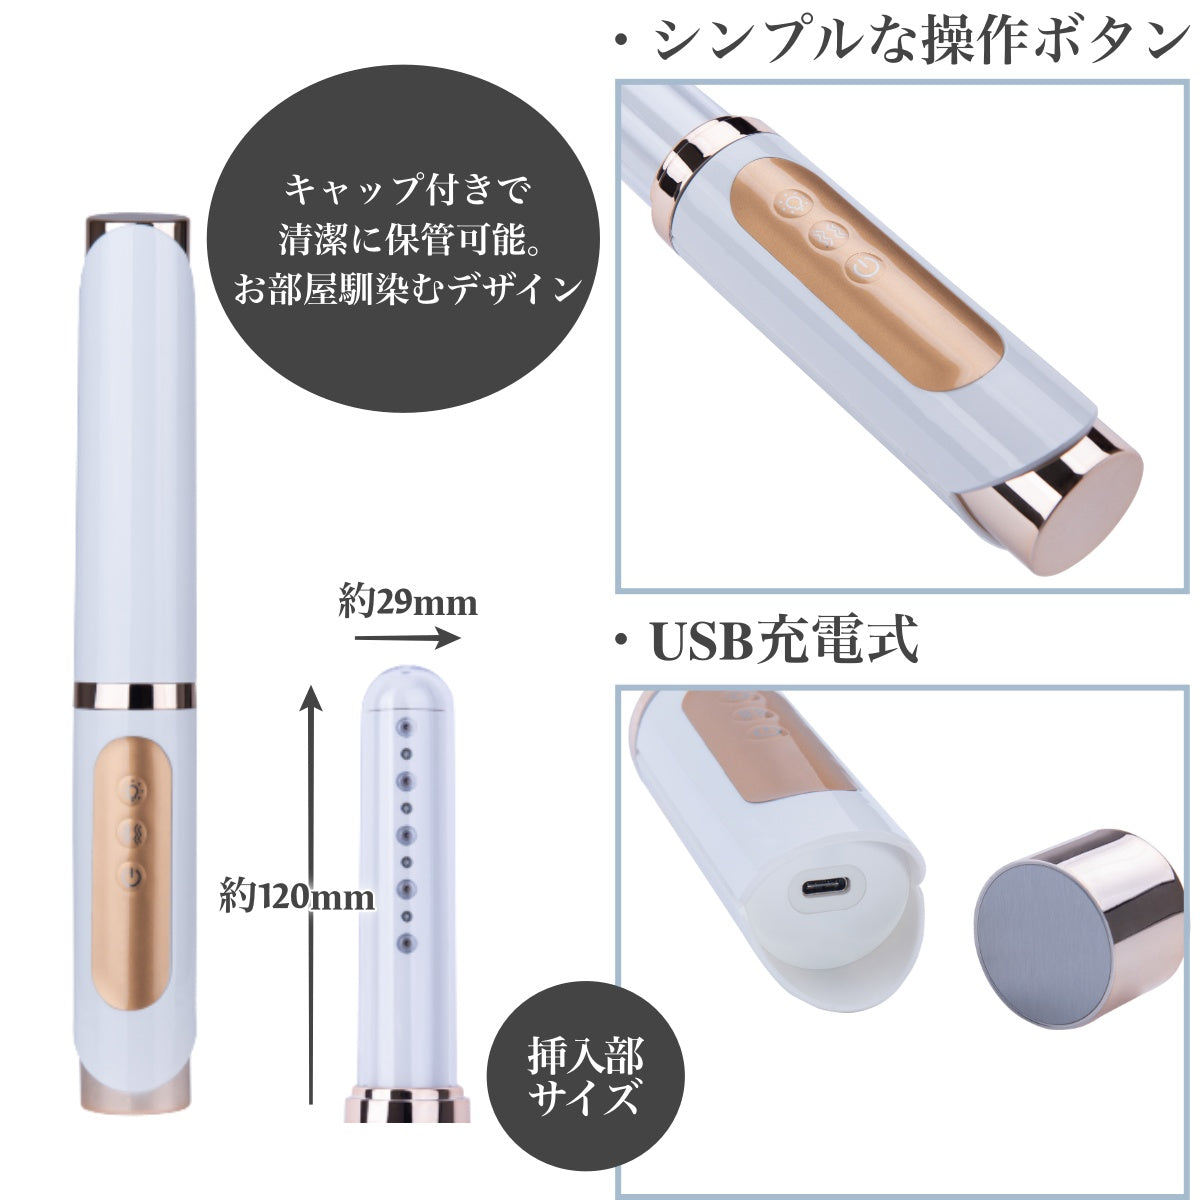 yoniCARE 家庭用膣トレ器 専用ジェル付